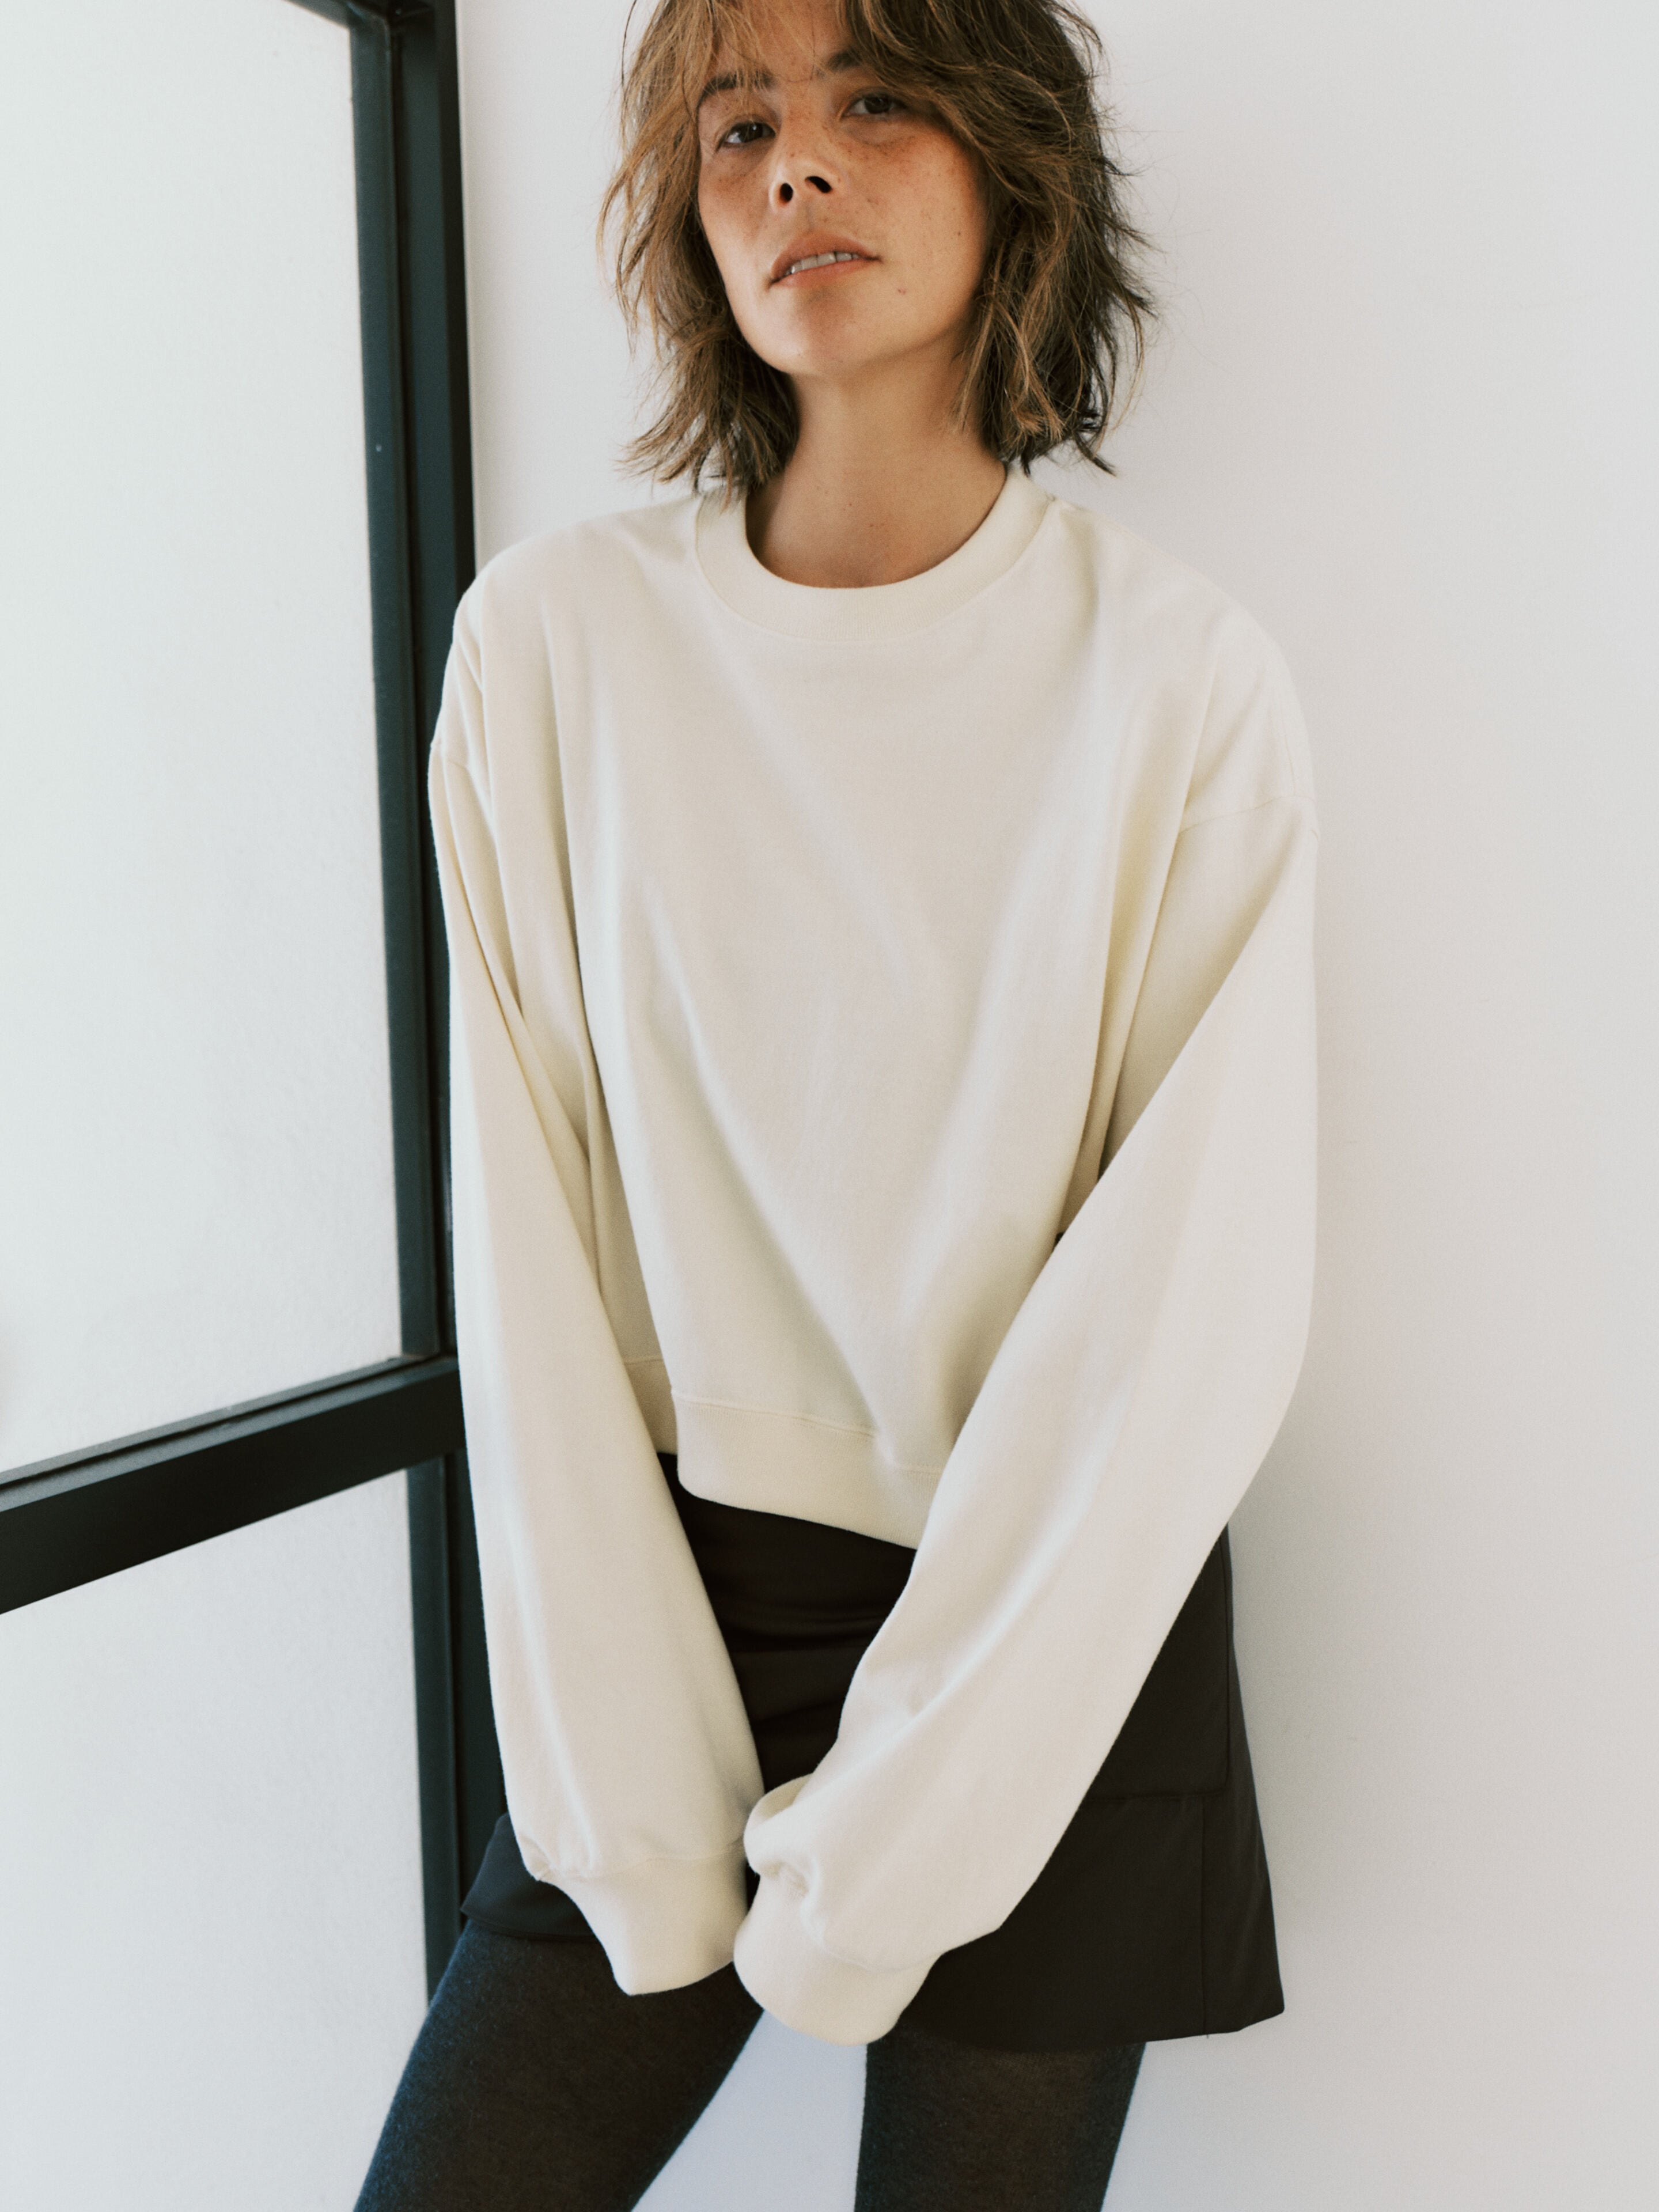 TOMBOY SWEAT SHIRT (butter milk) TNH23200-41 | THE NEWHOUSE powered by BASE